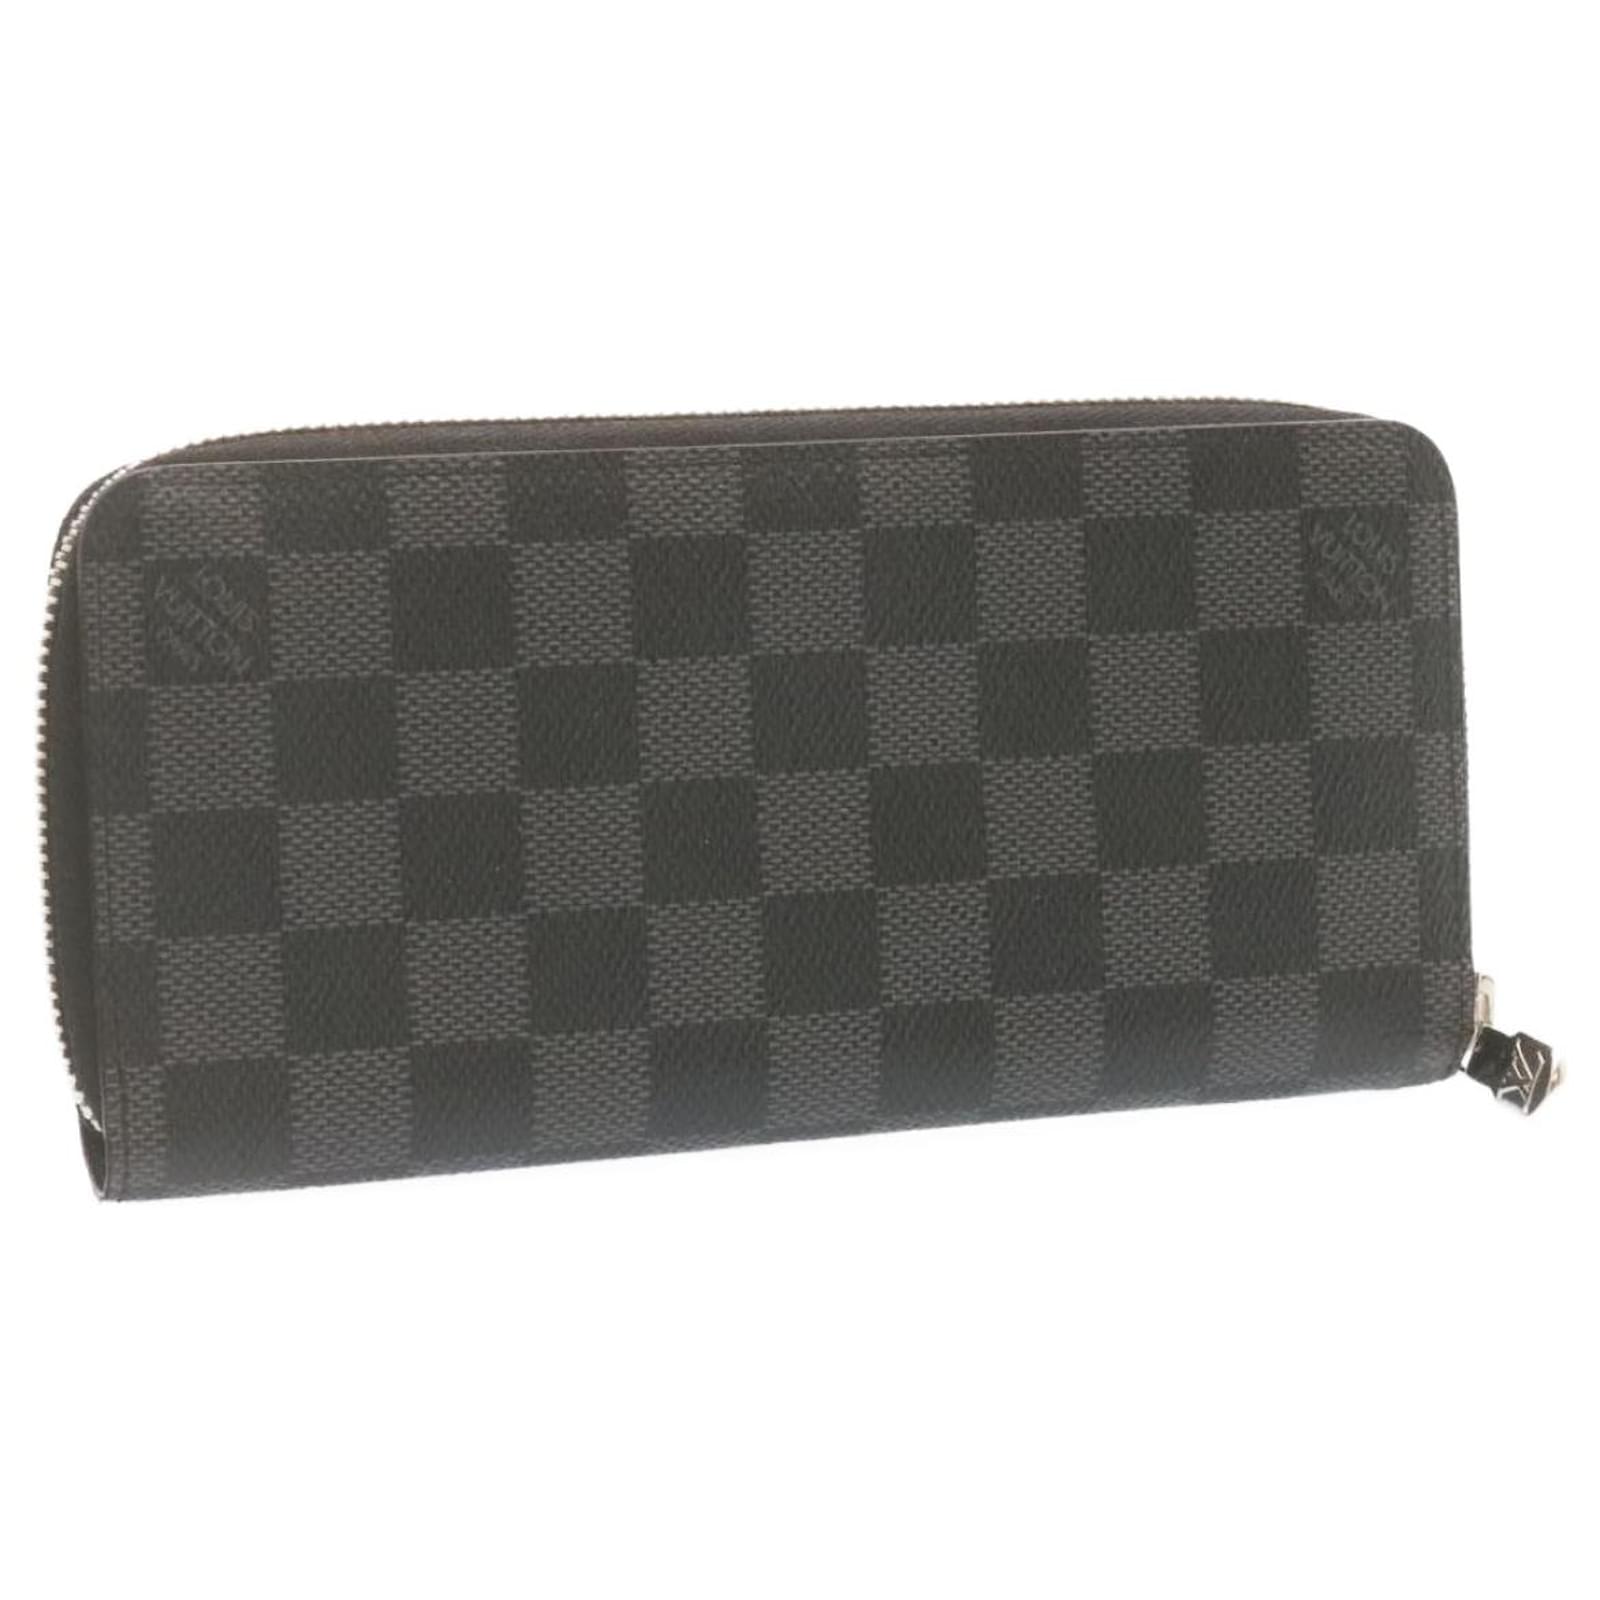 Zippy Dragonne Damier Graphite Canvas - Wallets and Small Leather Goods